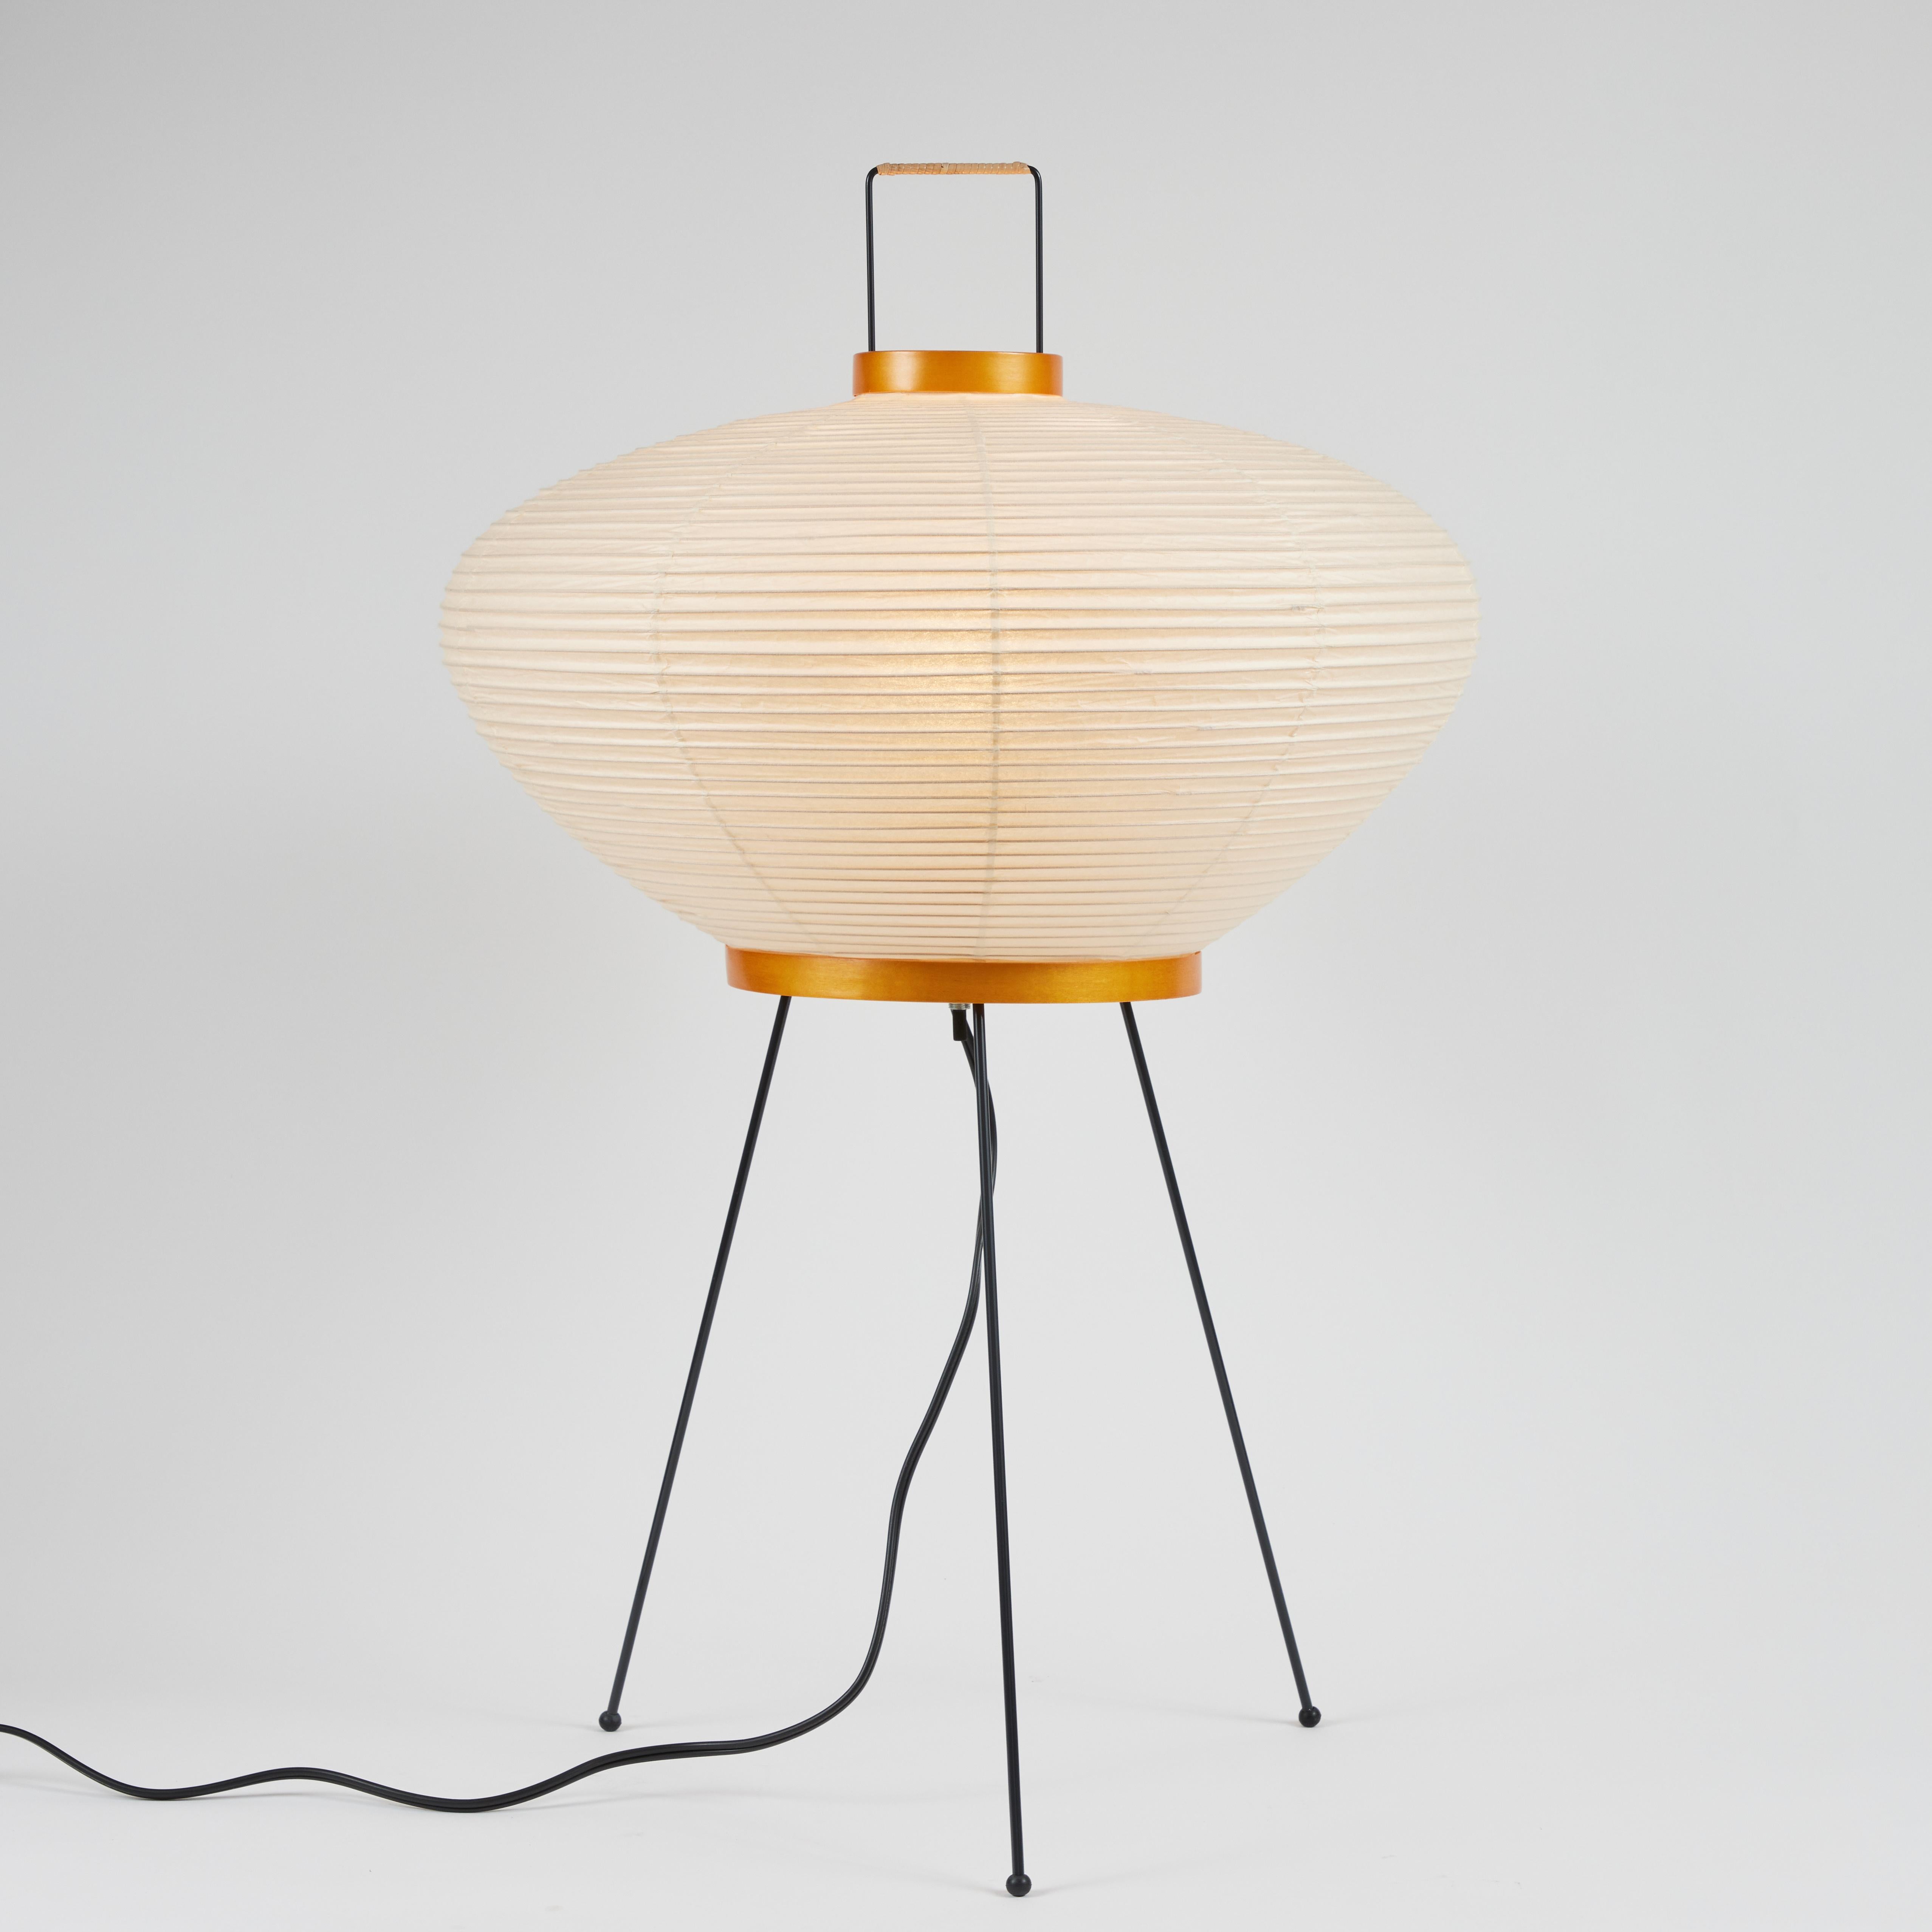 Akari model 9A light sculpture by Isamu Noguchii. The shade is made from handmade washi paper, wood and bamboo ribs with authentic Noguchi Akari manufacturer's stamp. Akari light sculptures by Isamu Noguchi are considered icons of 1950s modern